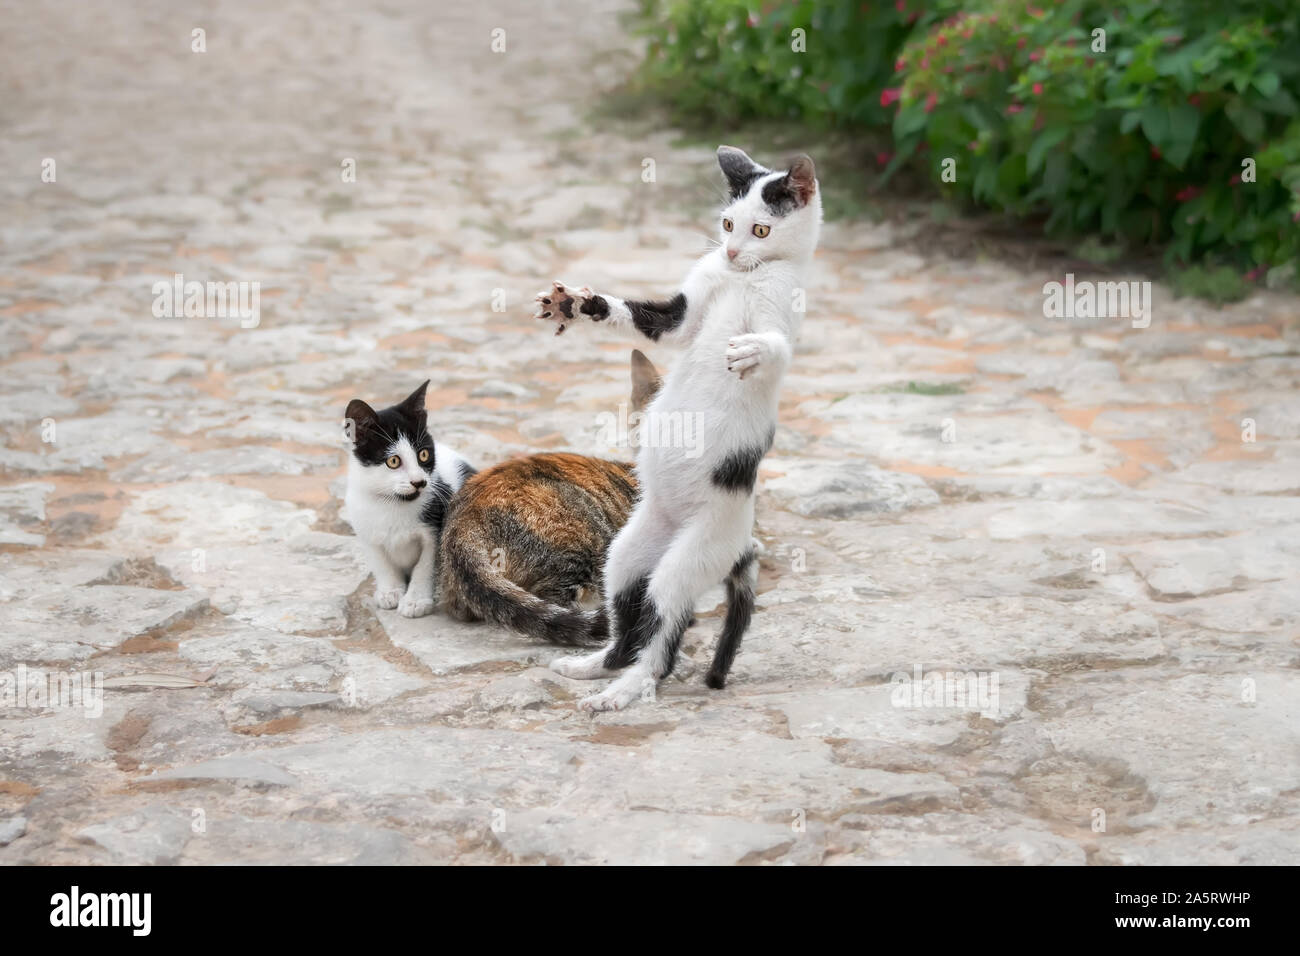 Funny cat kitten, bicolor white with black patches, playing, standing on hind legs with wide spread arms and paws in a playful manner, Crete, Greece Stock Photo